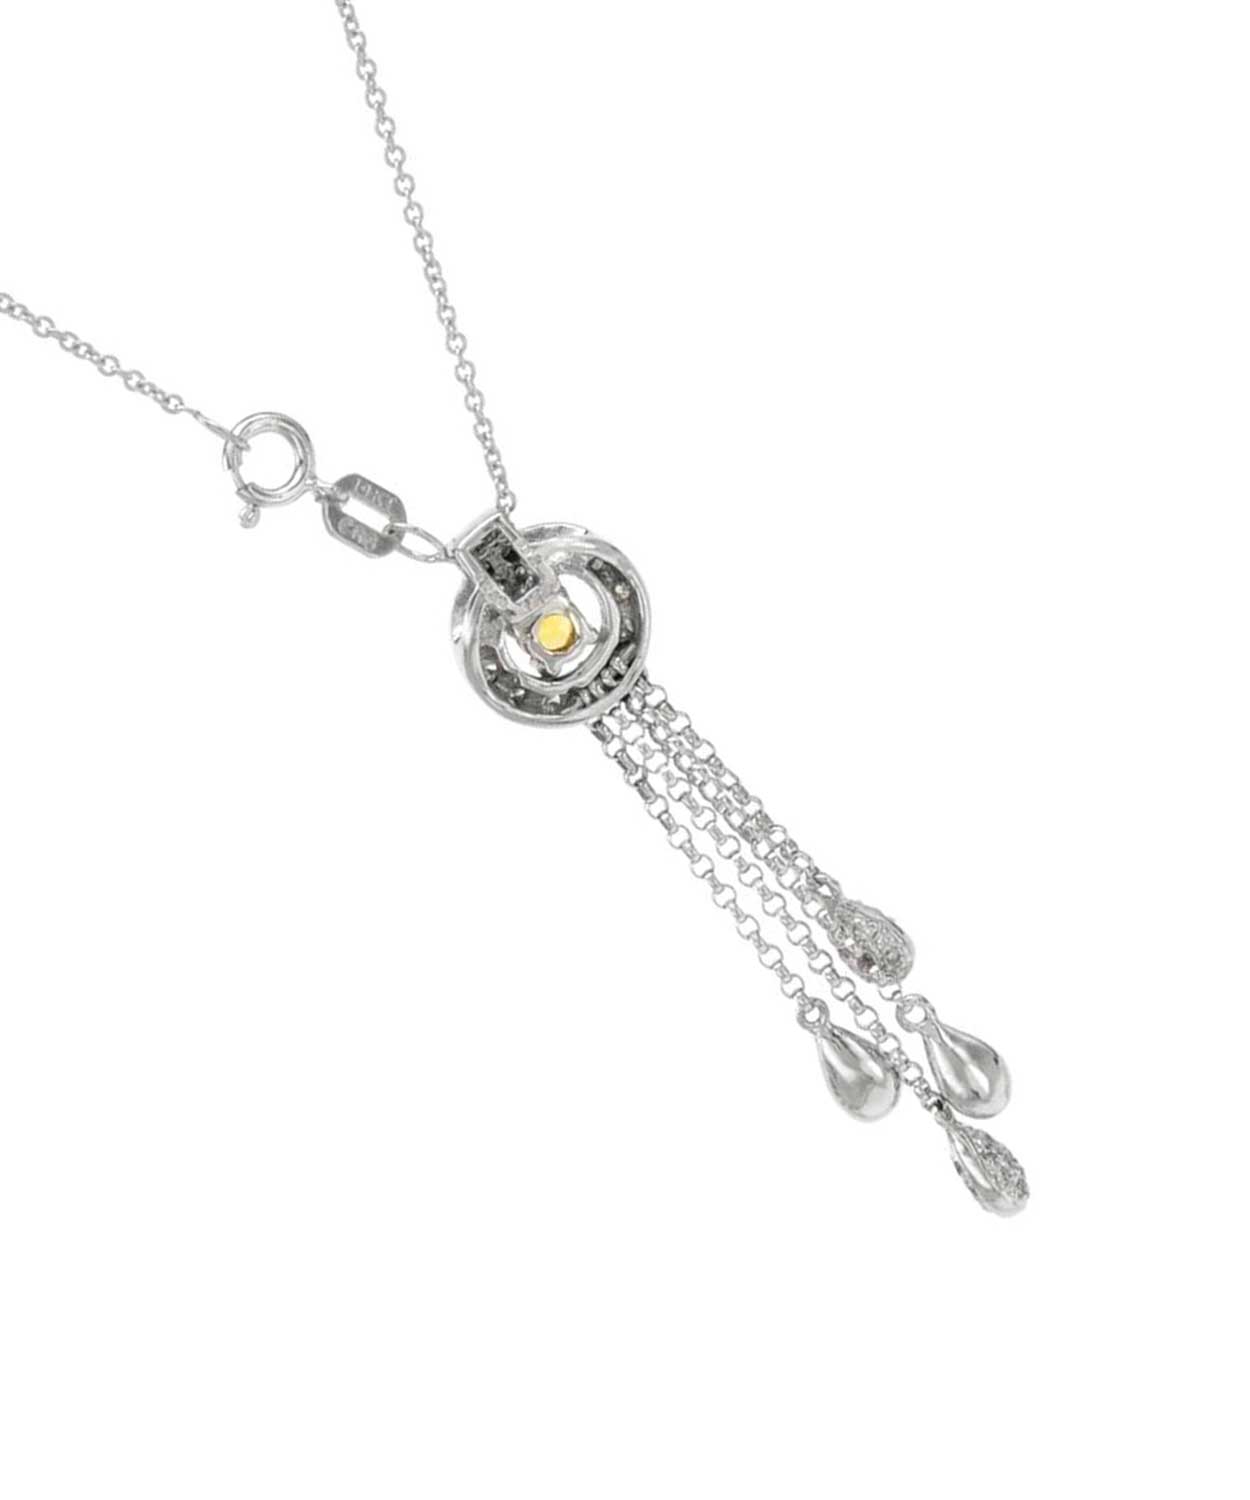 0.46 ctw Diamond and Yellow Sapphire 14k Gold Drop Necklace View 2